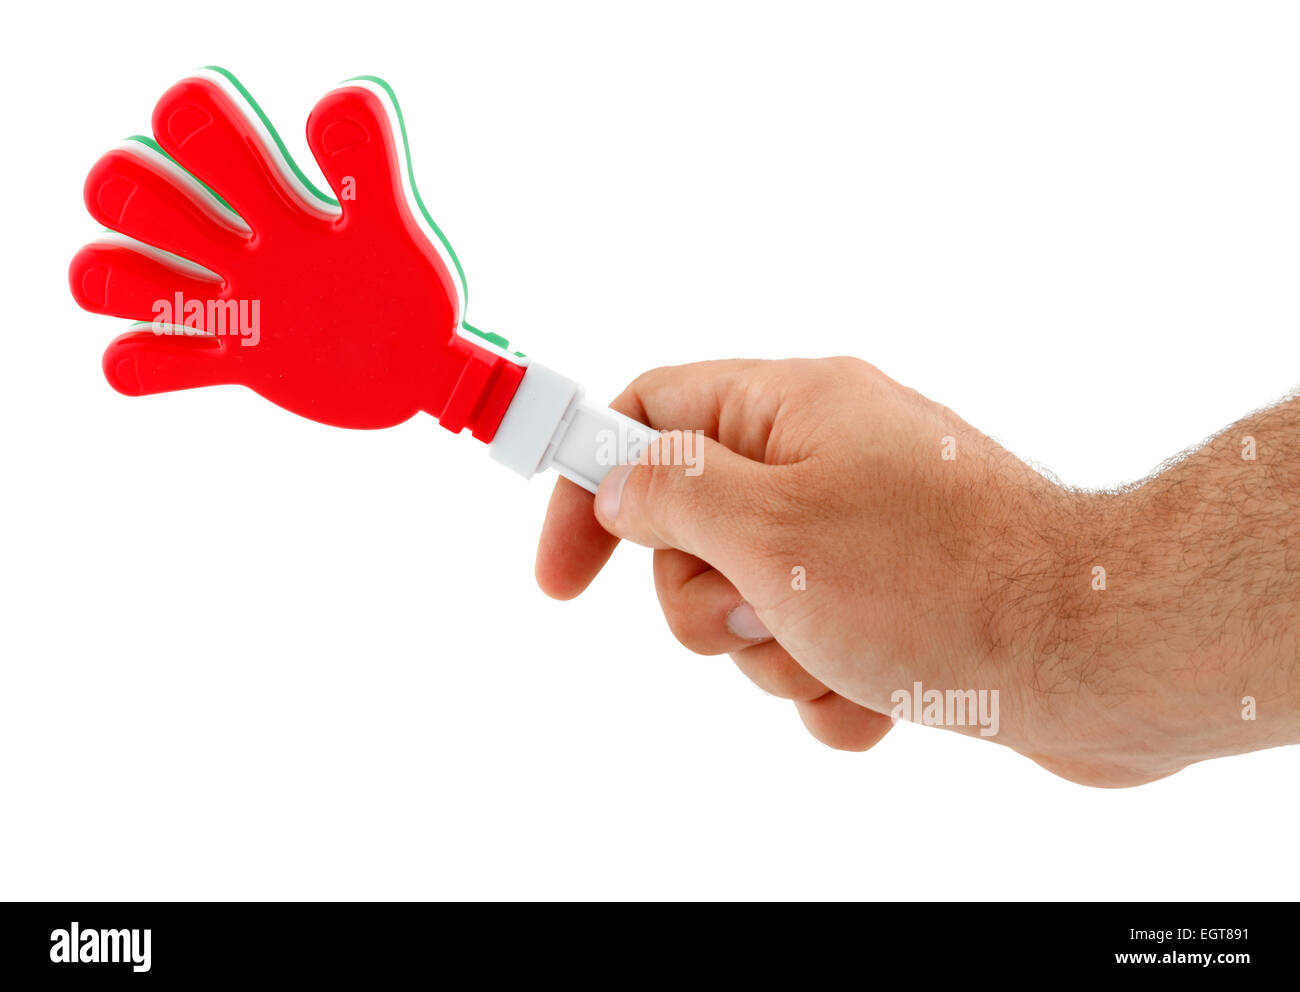 Toy in the shape of hand to make noise. Made of plastic and colors of the Italian flag. Stock Photo